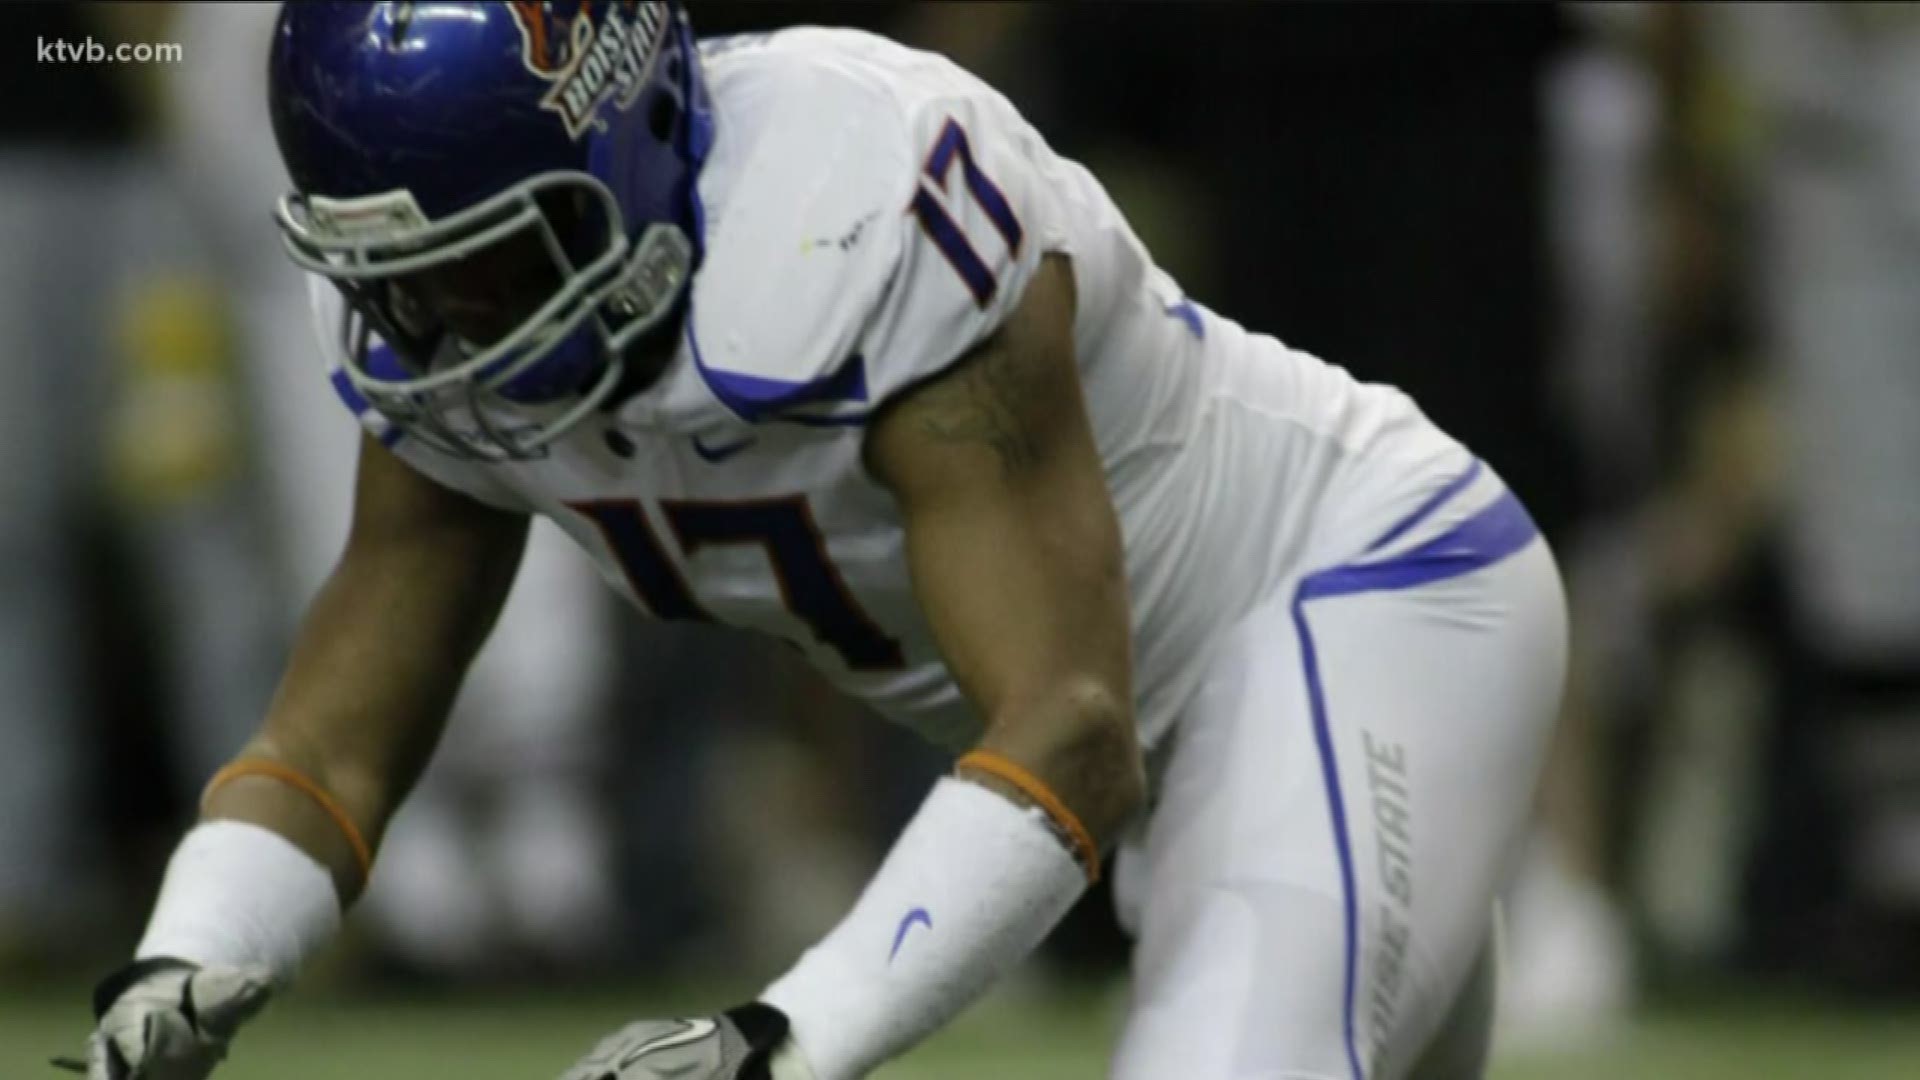 The former Boise State and NFL linebacker fills the Broncos' last coaching vacancy.